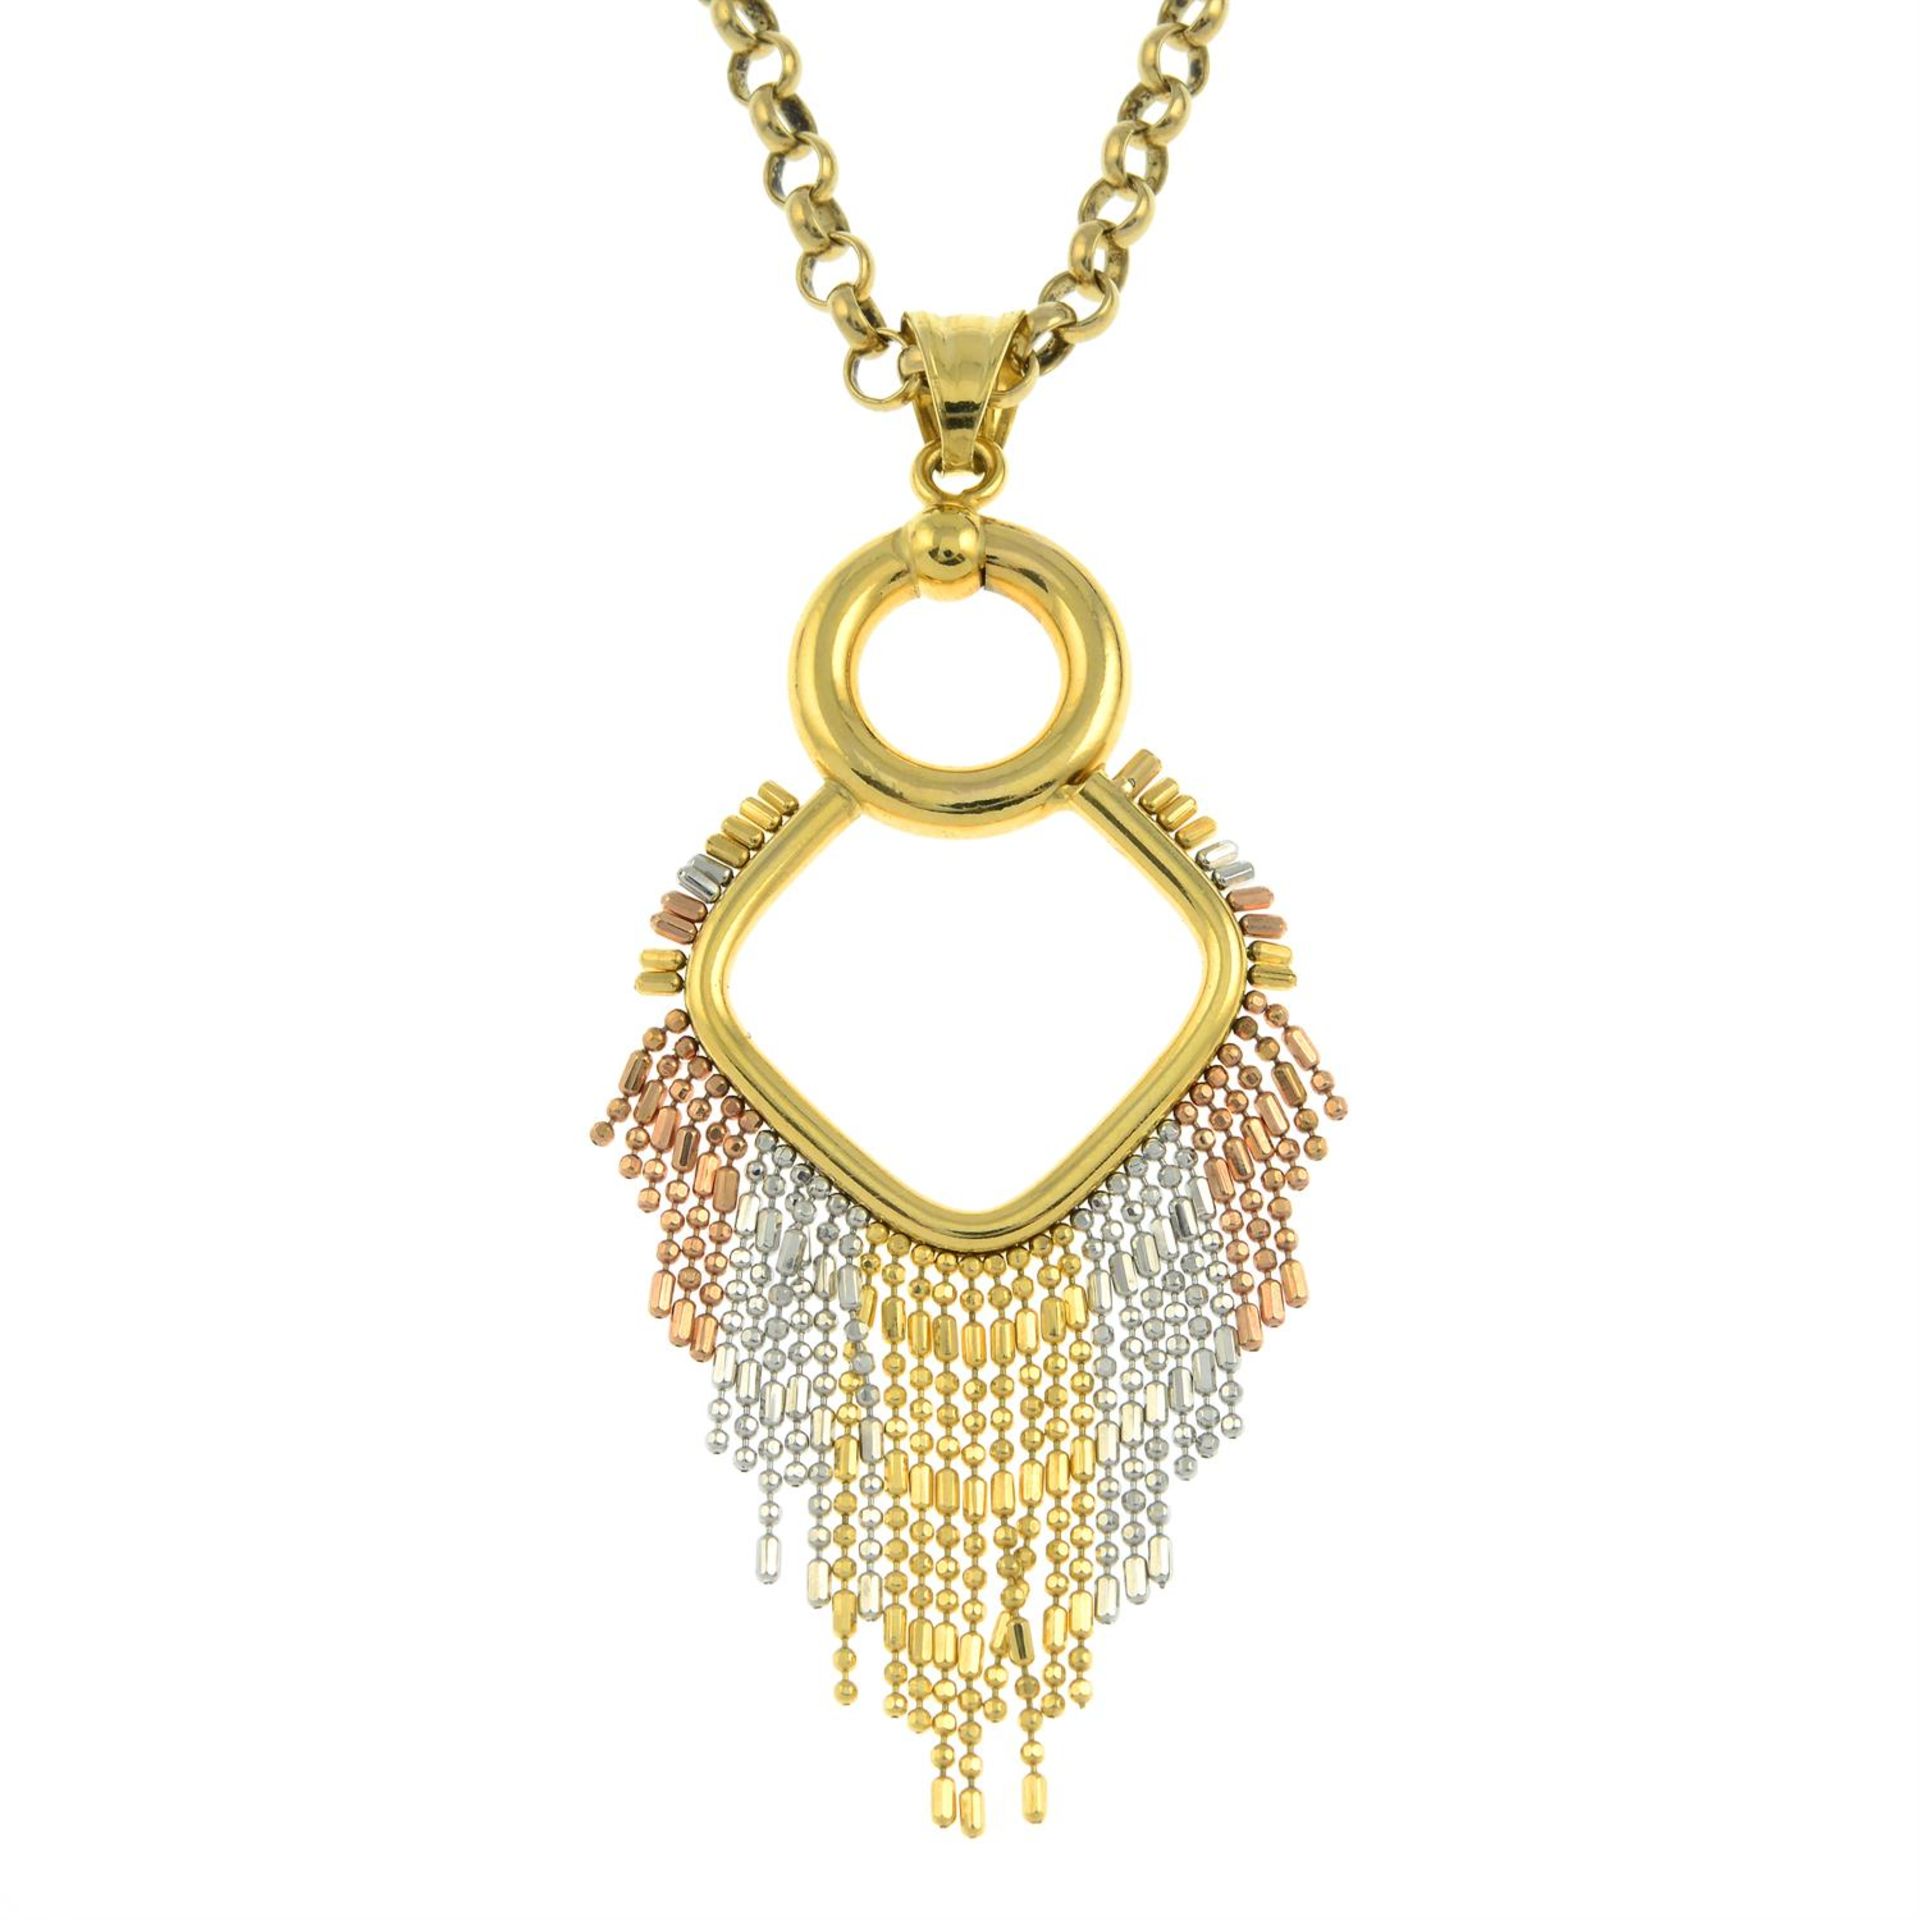 A 9ct gold tricolour drop pendant, with 9ct gold belcher-link chain.